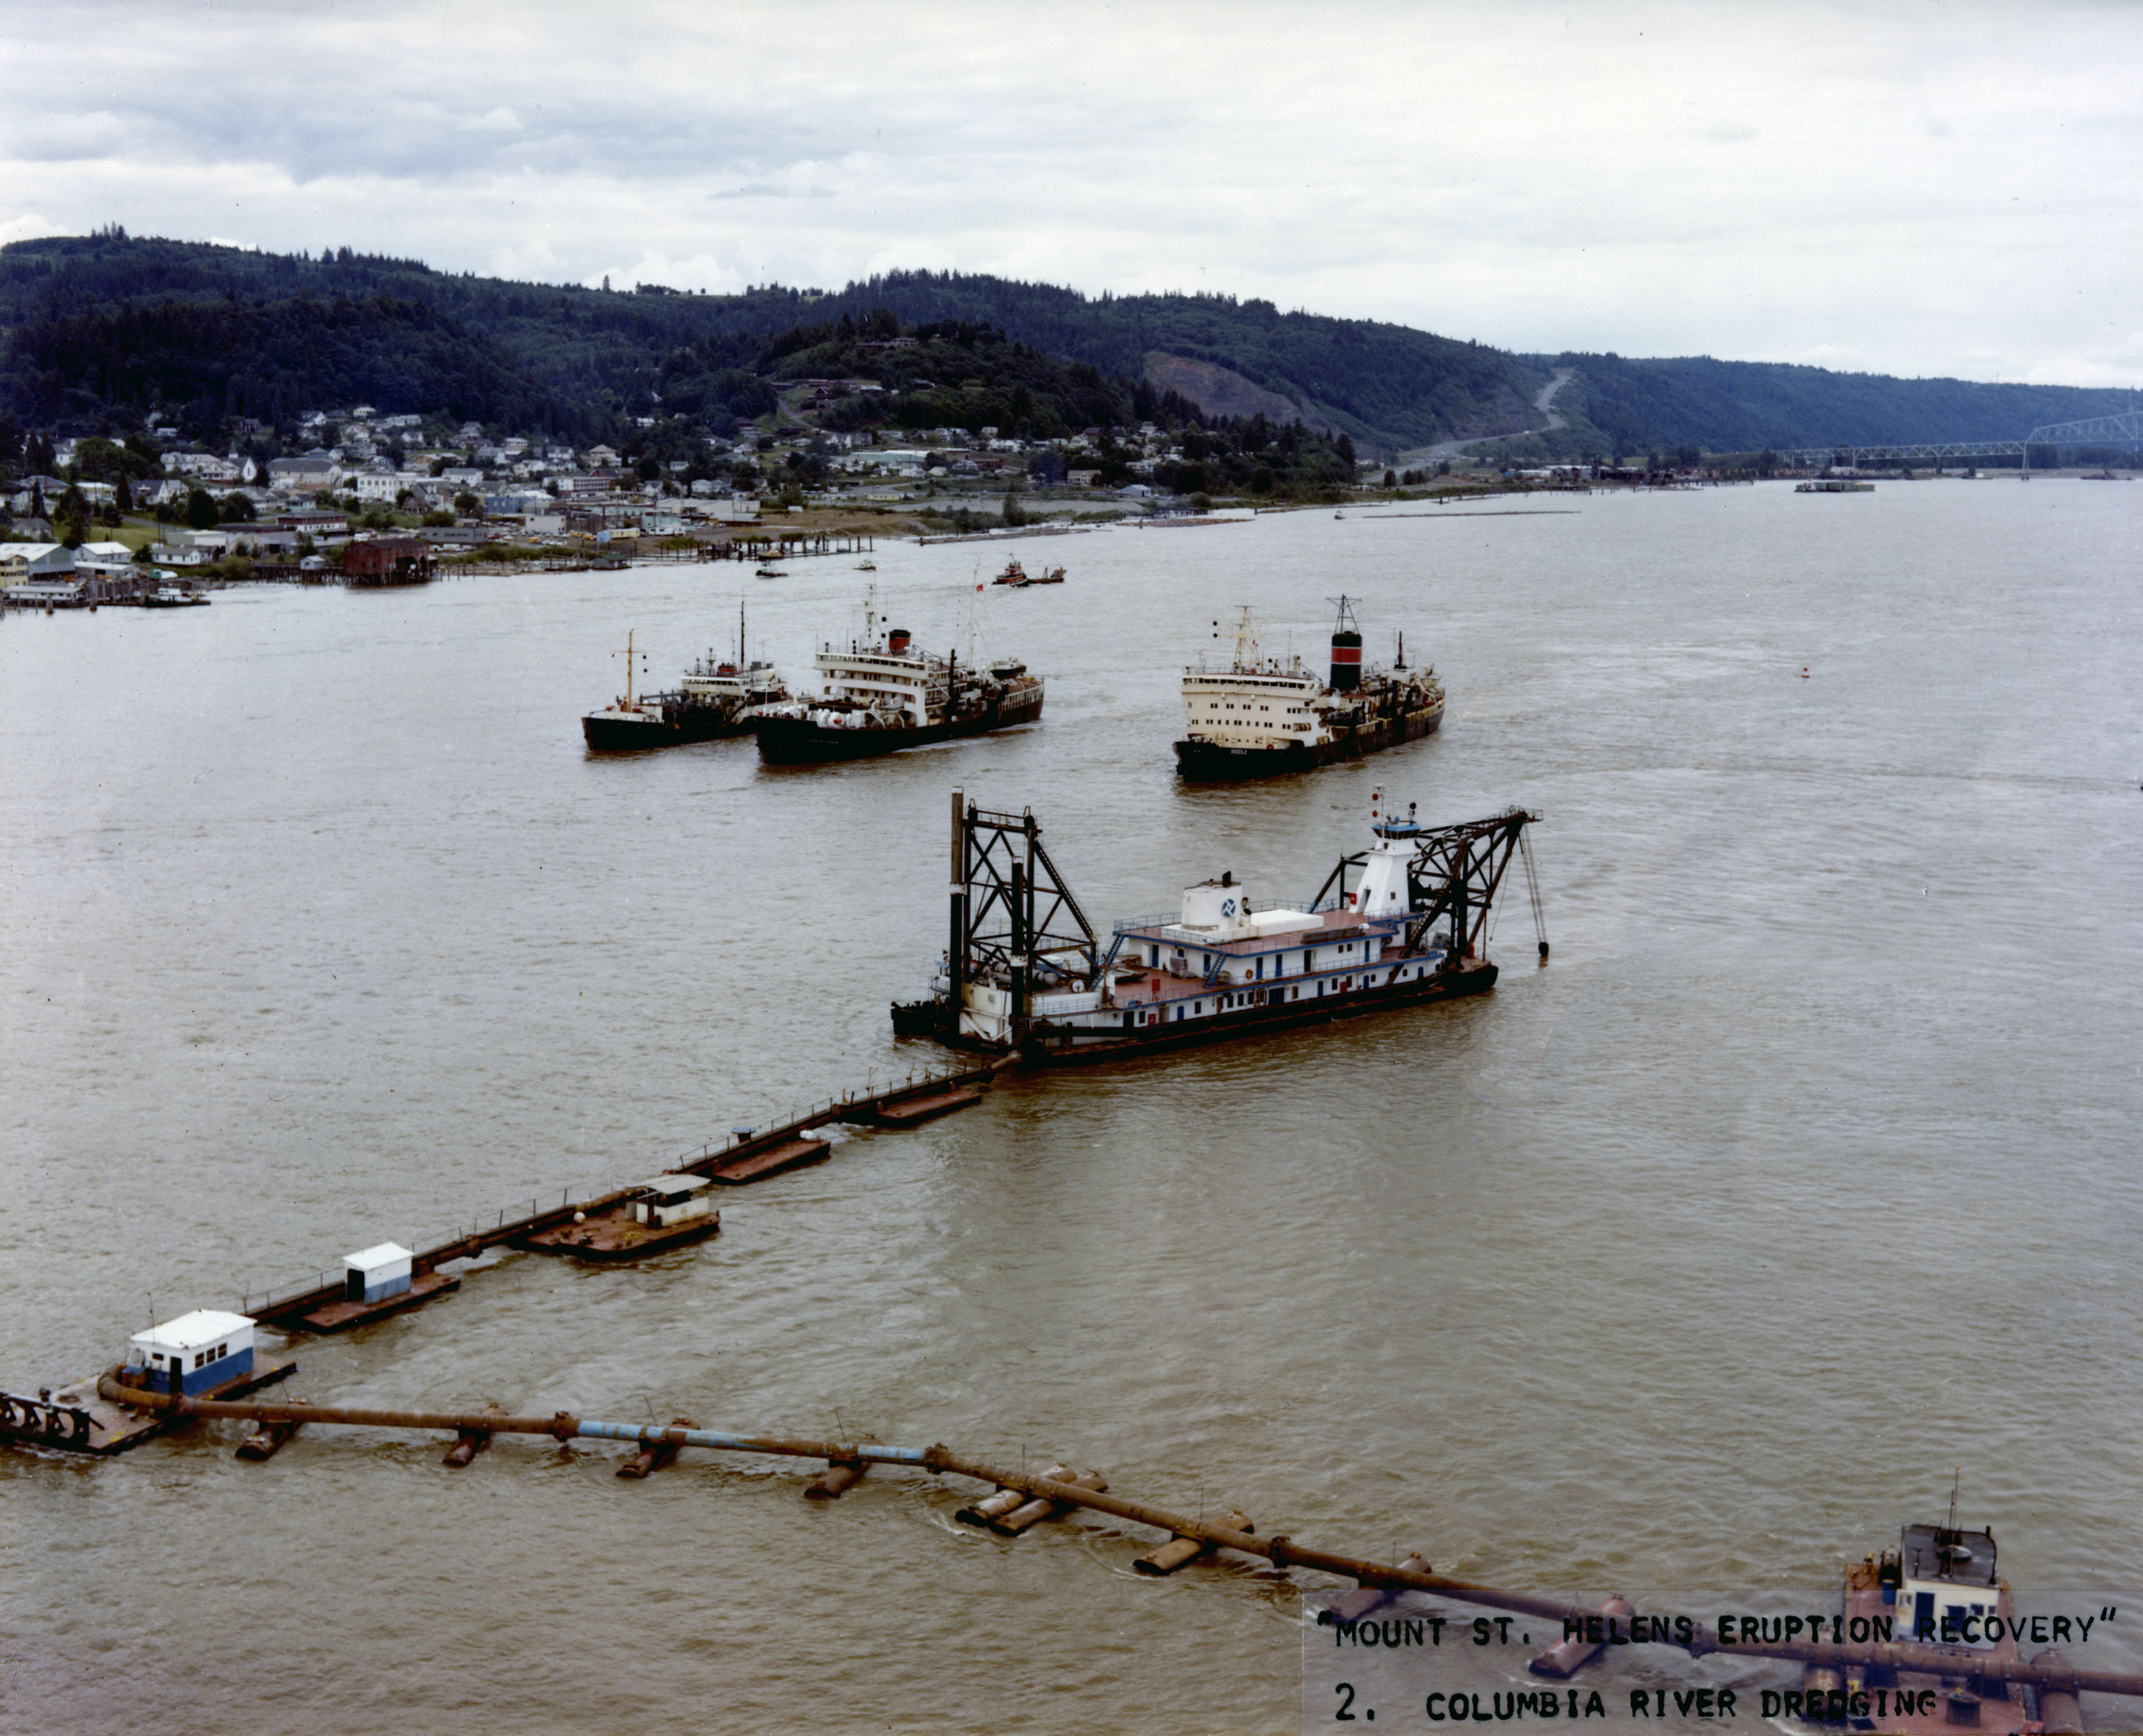 Dredge and other ships in the wide river